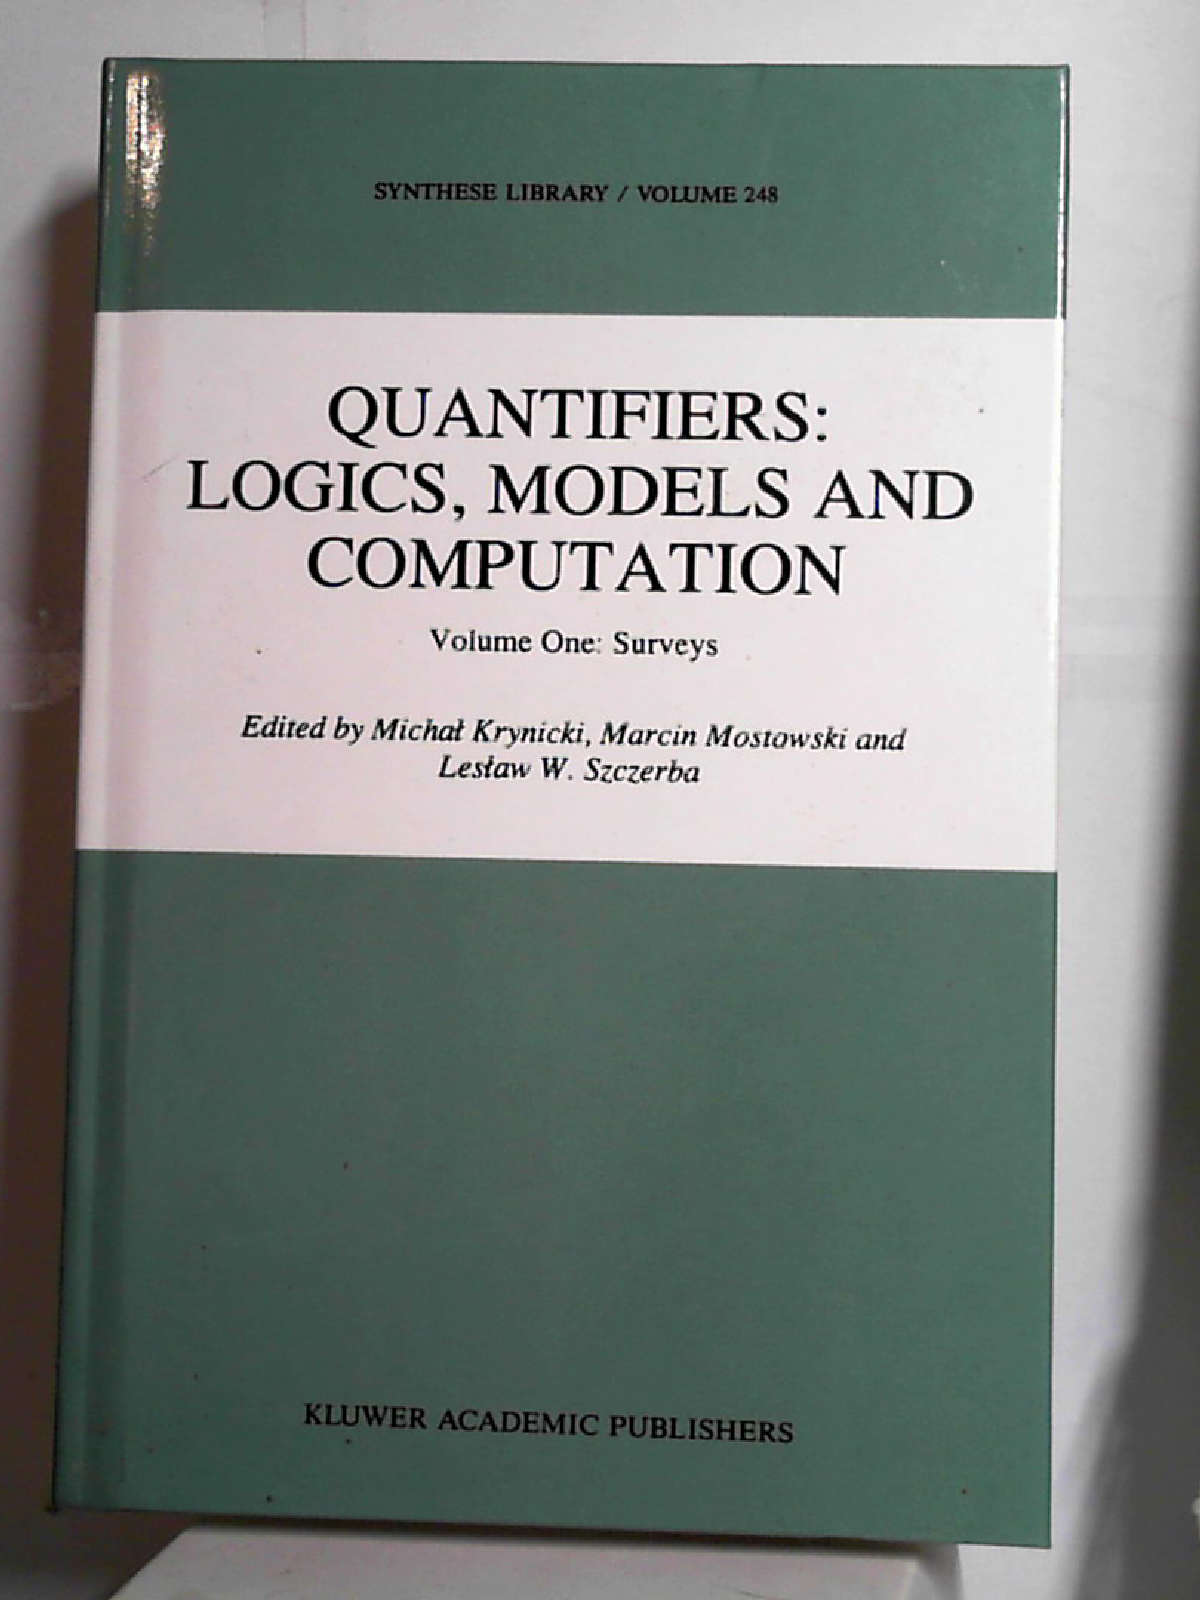 Quantifiers: Logics, Models and Computation: Volume One: Surveys (Synthese Library (248), Band 248) [Hardcover] Krynicki, Michal Mostowski, M. and Szczerba, L.W.